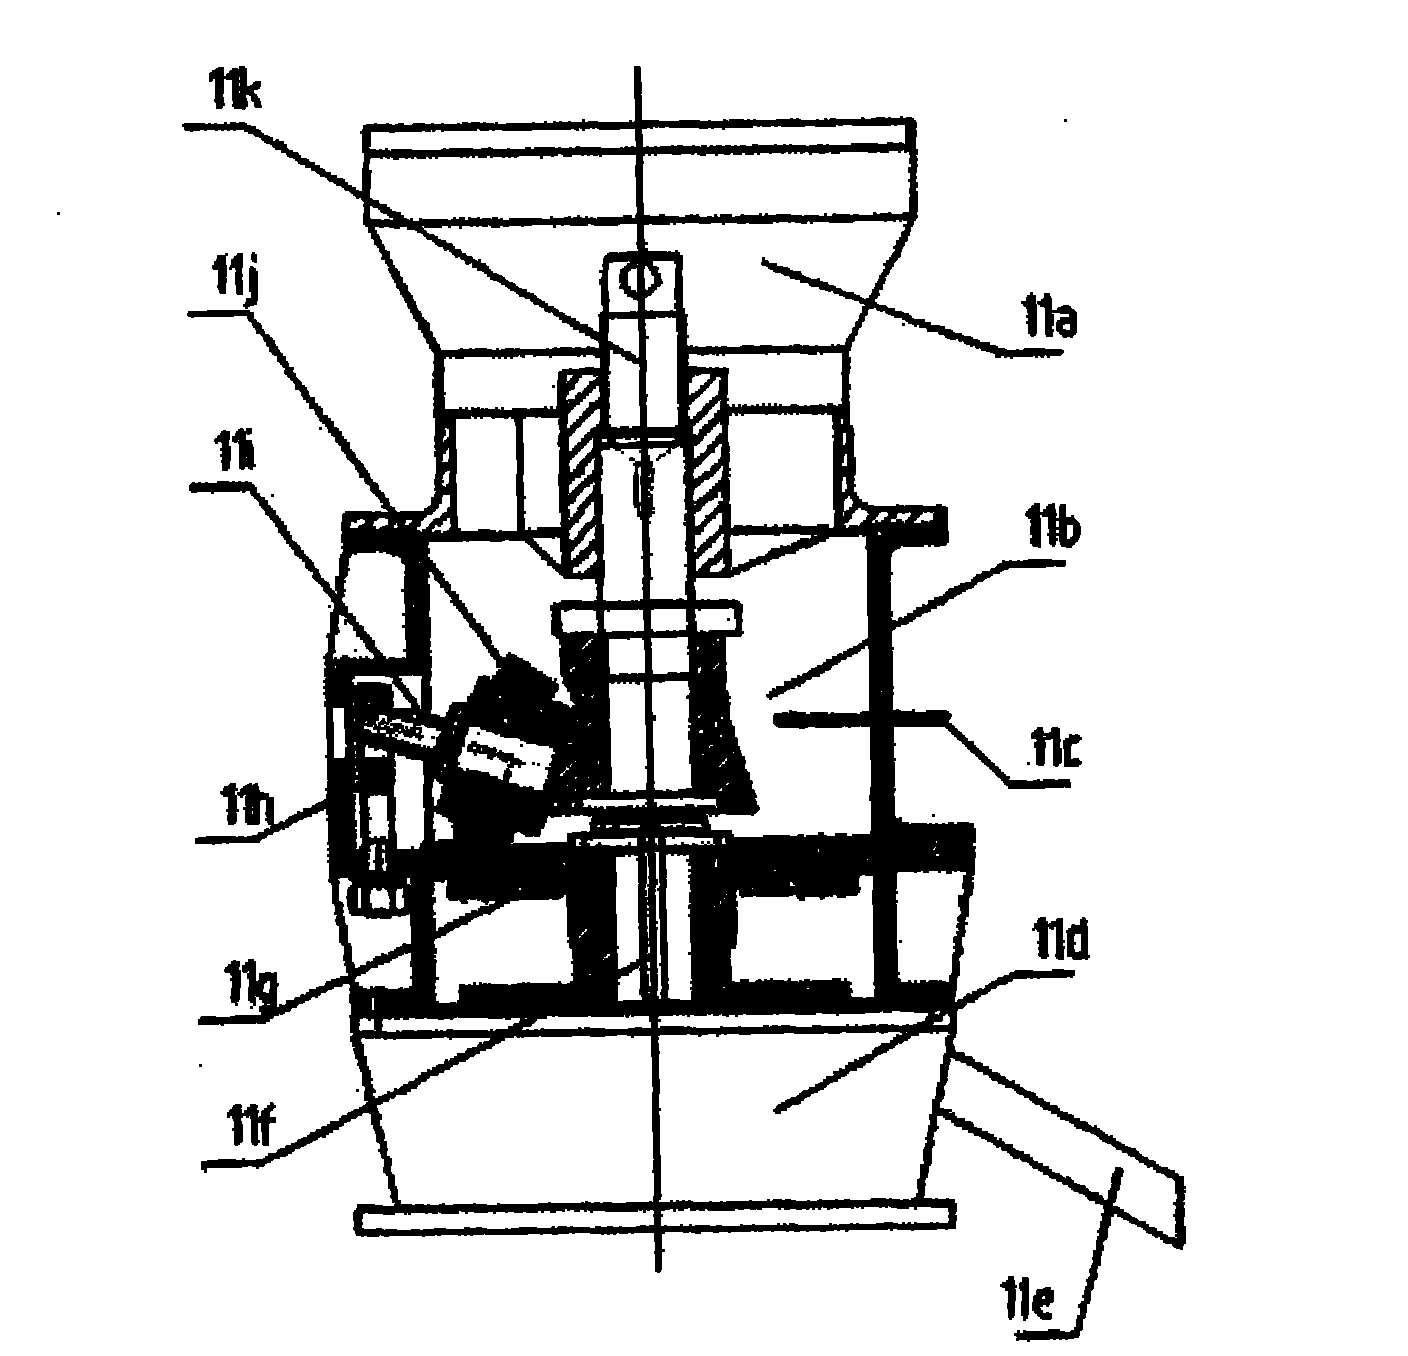 Biomass granulation system and device